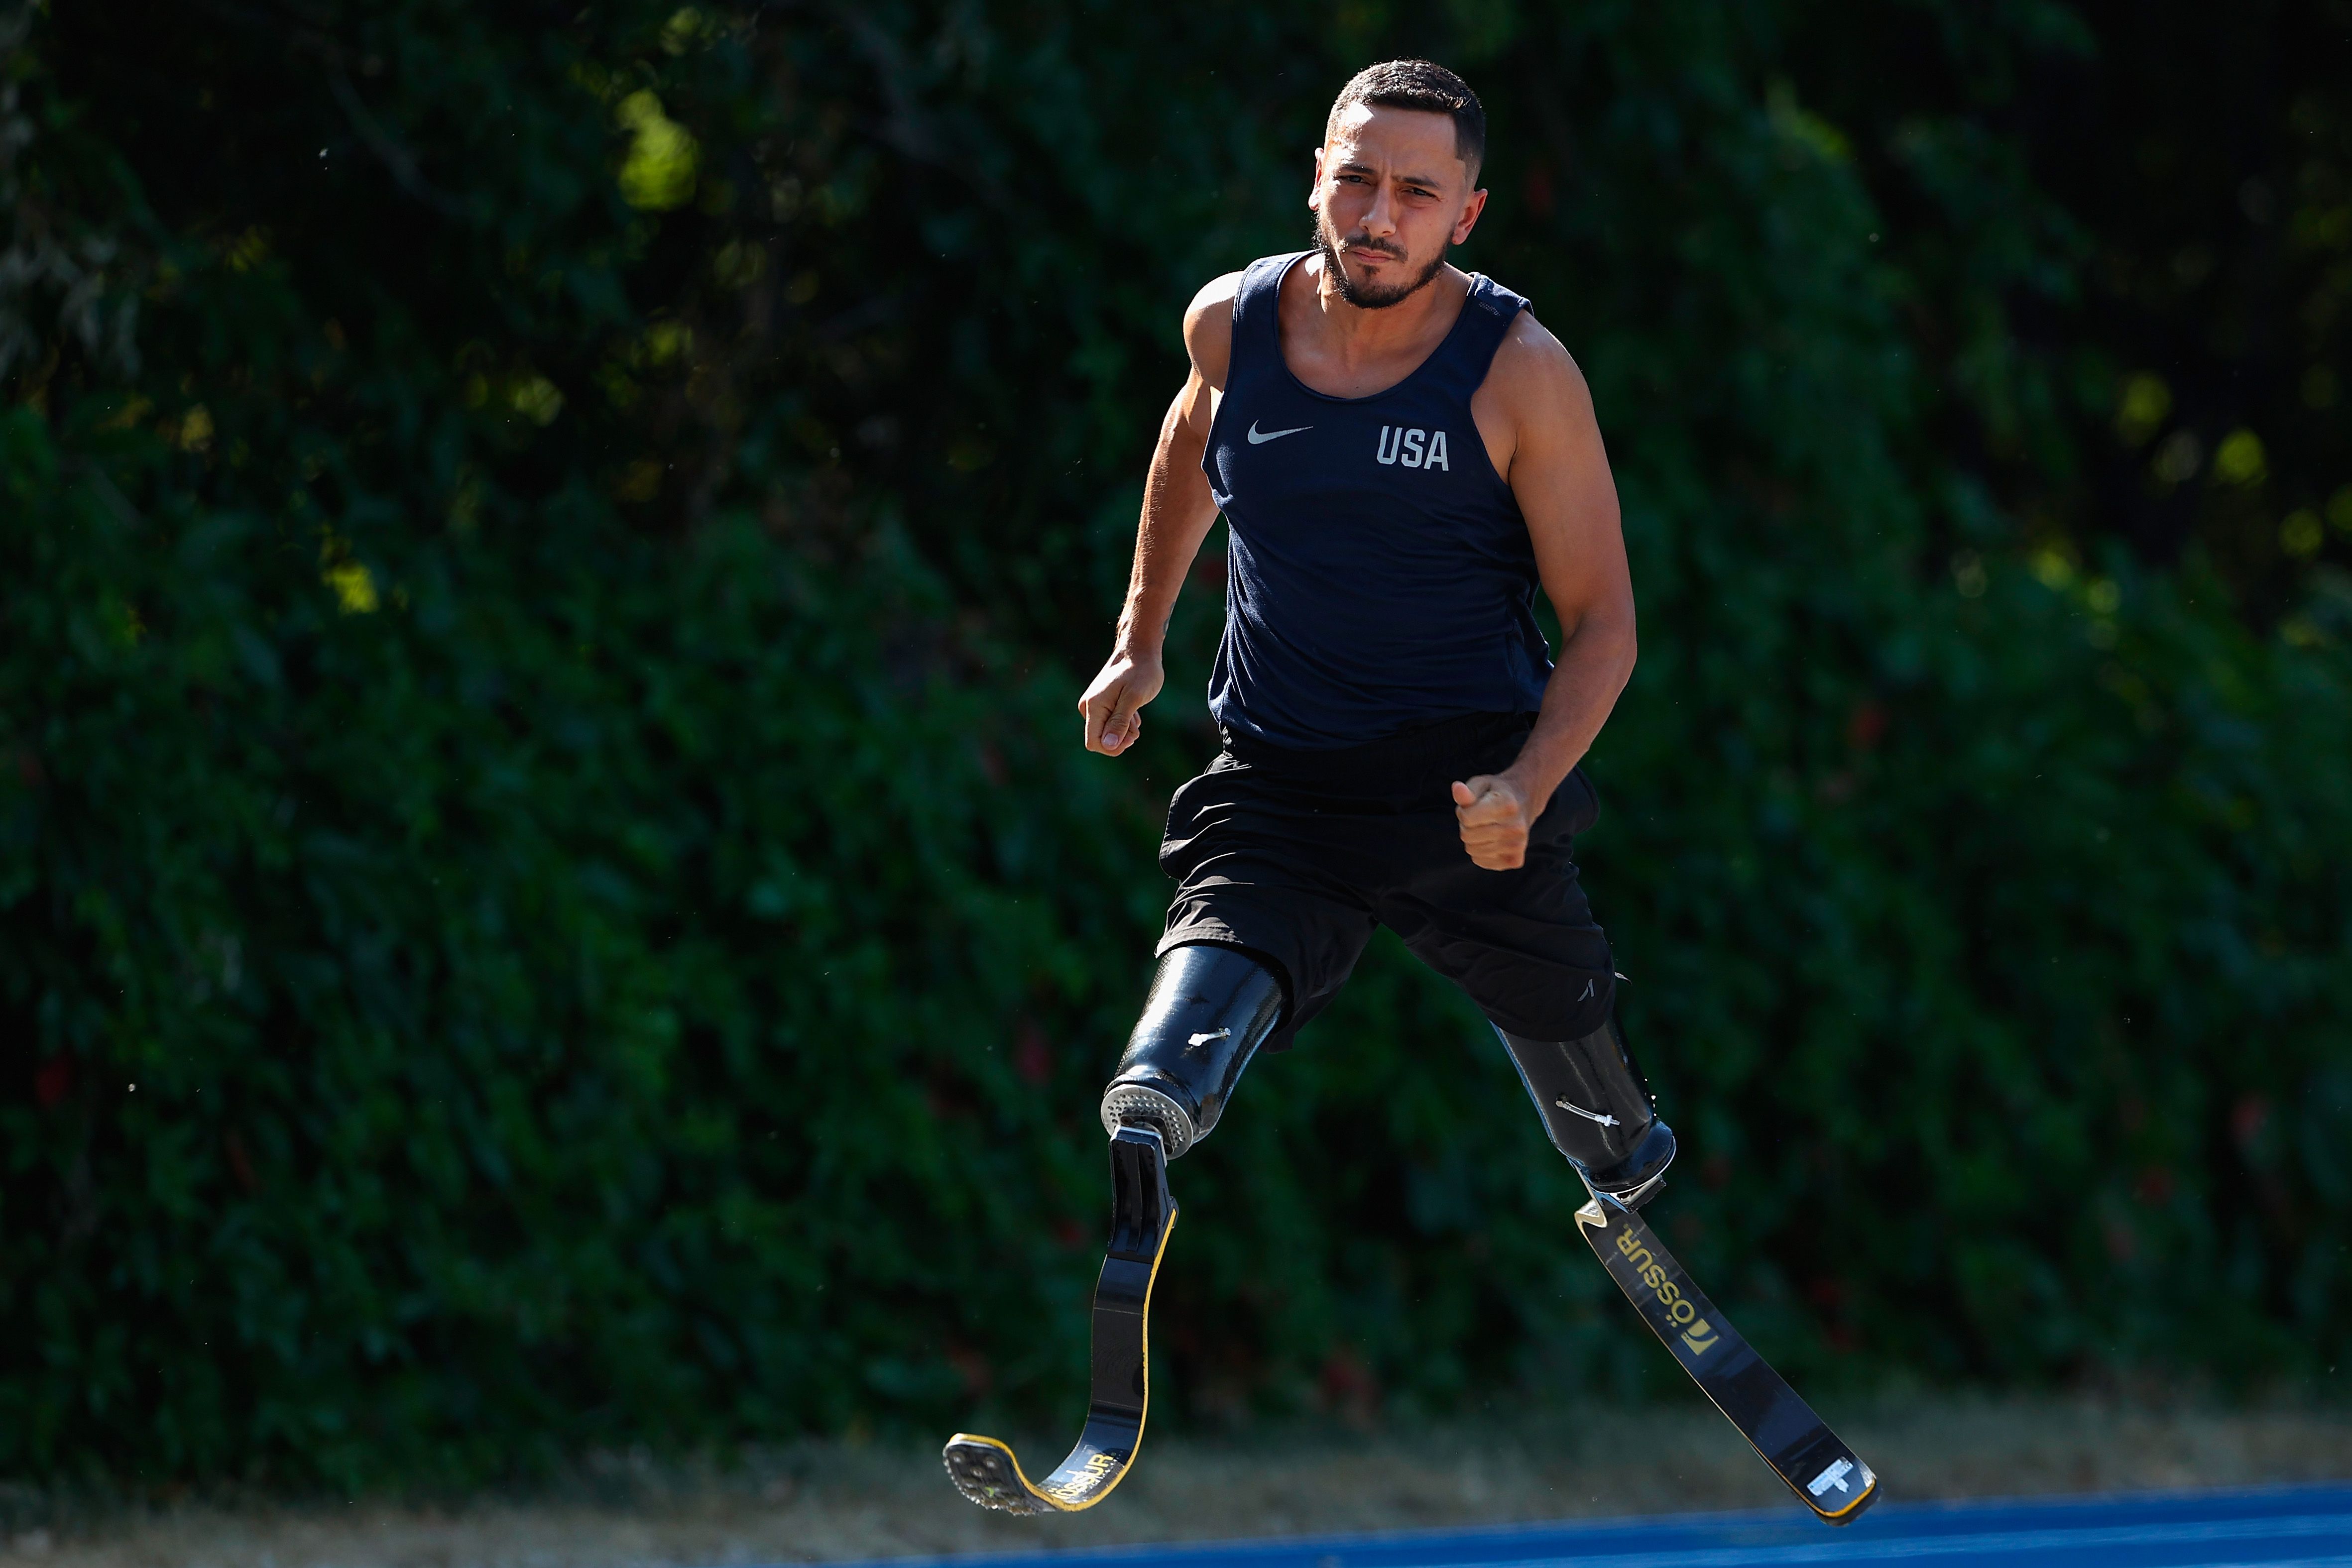 United States Paralympic Athlete Luis Puertas trains during a practice session ahead of the 2021 U.S. Paralympic Trials at Breck High School on June 16, 2021 in Minneapolis, Minnesota.